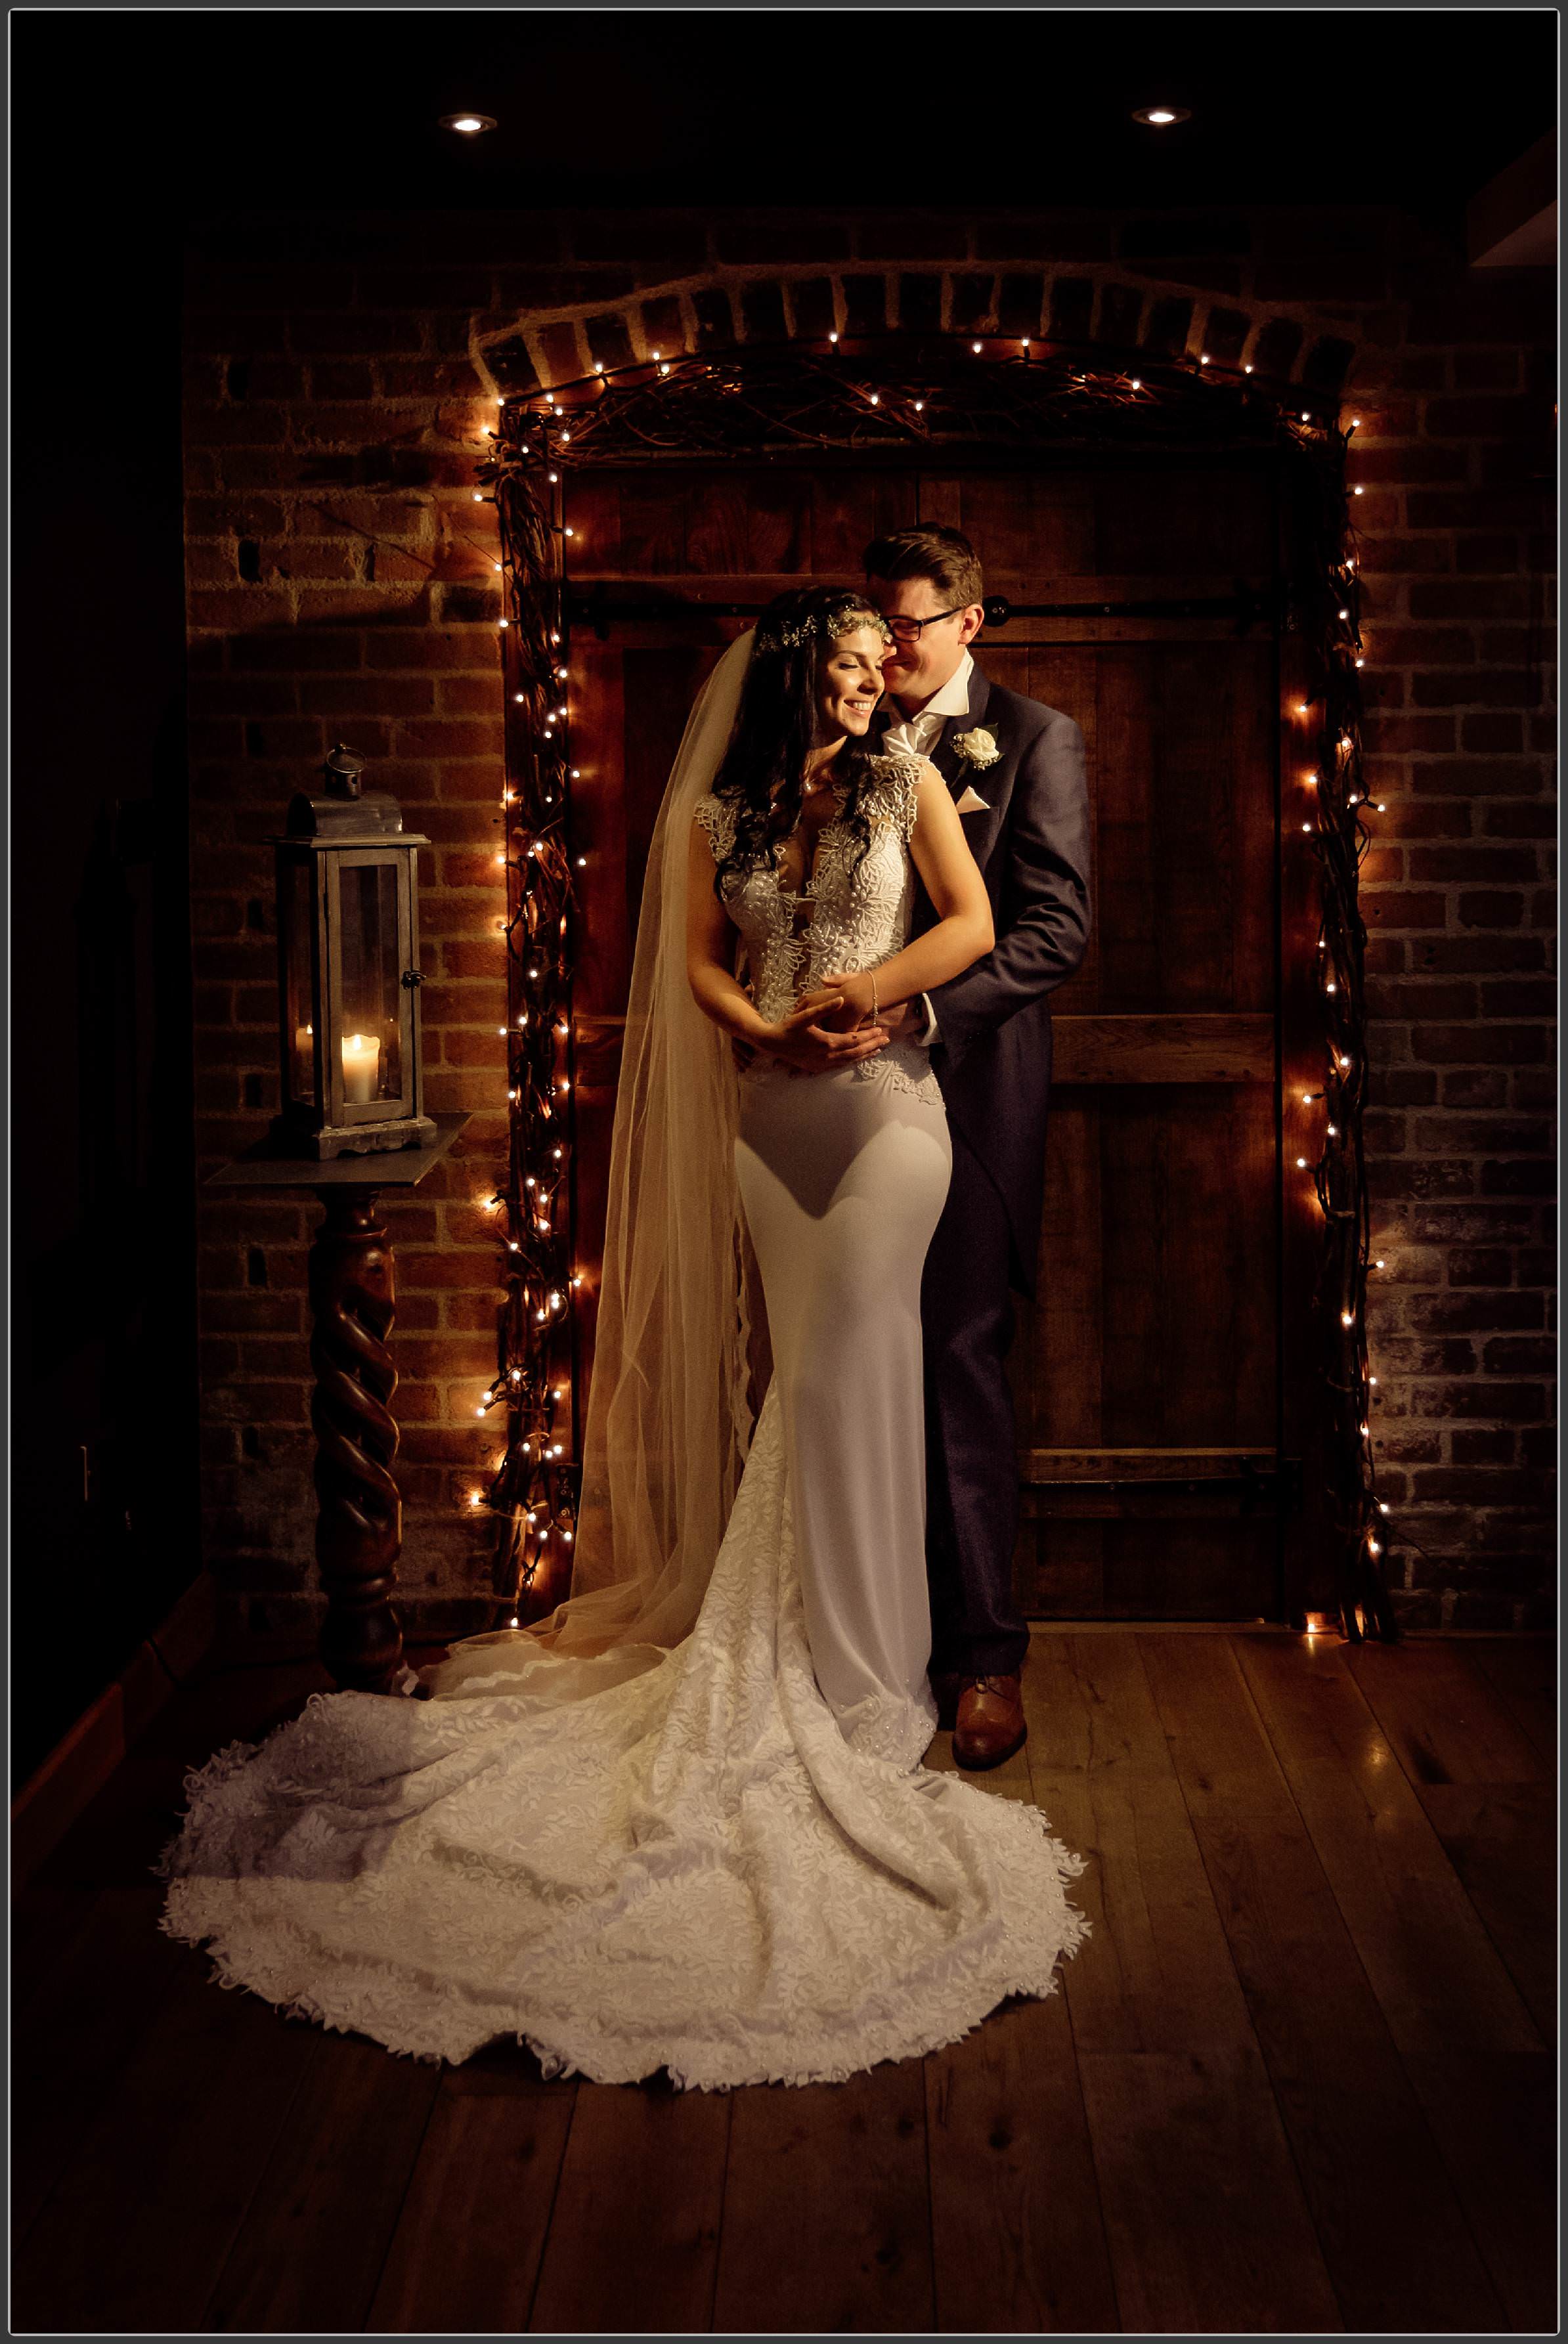 Weddings at Red House Barn